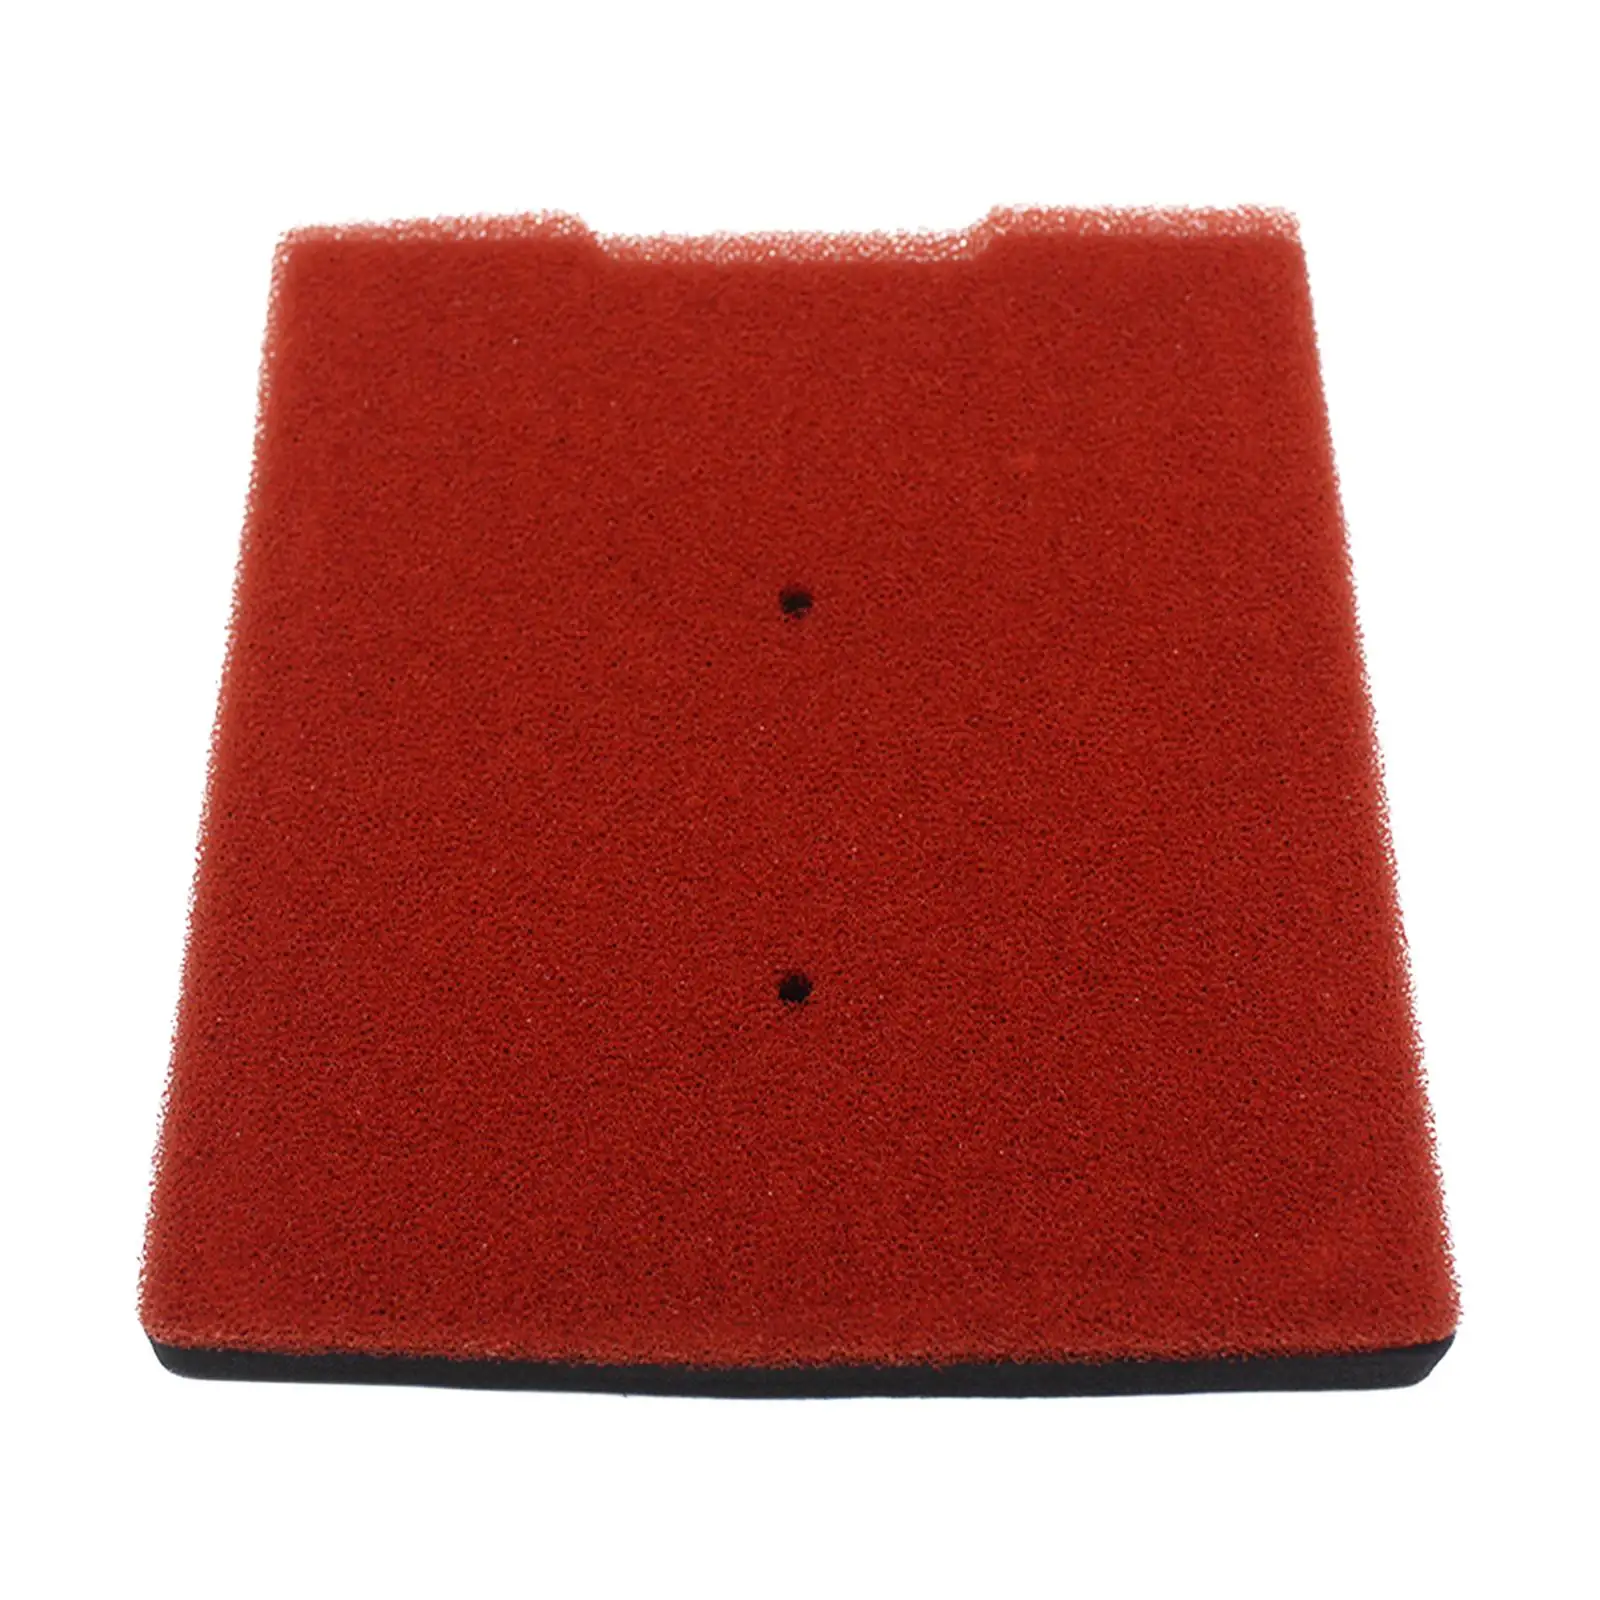 Motorcycle Air Filter Sponge Motorbike for  Kle 300 Replacement